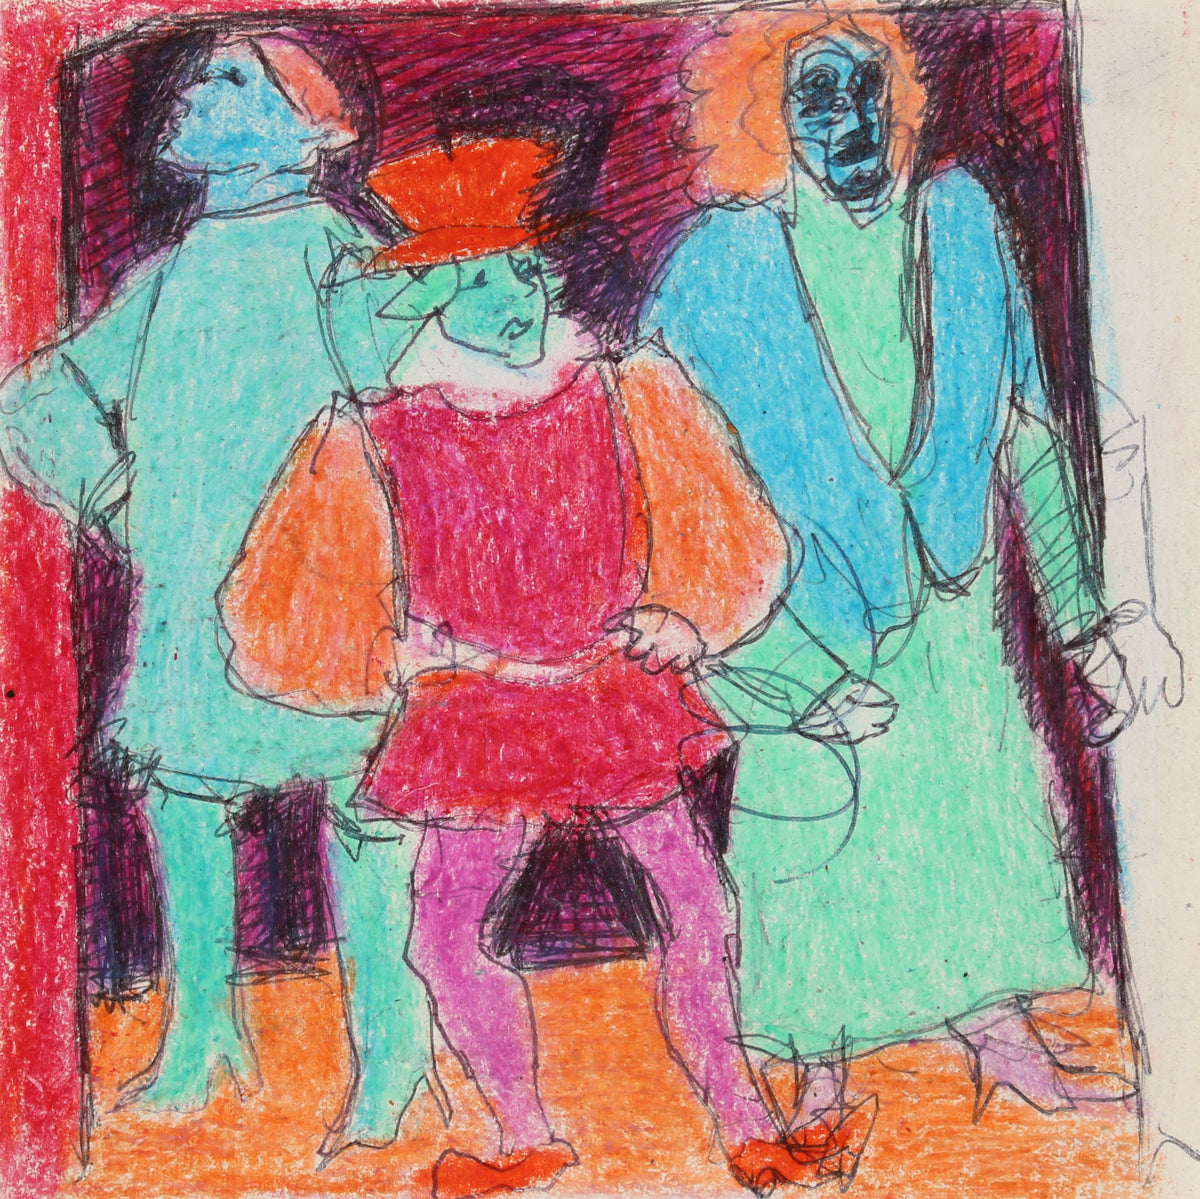 Colorful Figure Scene&lt;br&gt;January 11th 1987 Ink and Wax Crayon on Paper&lt;br&gt;&lt;br&gt;#90605